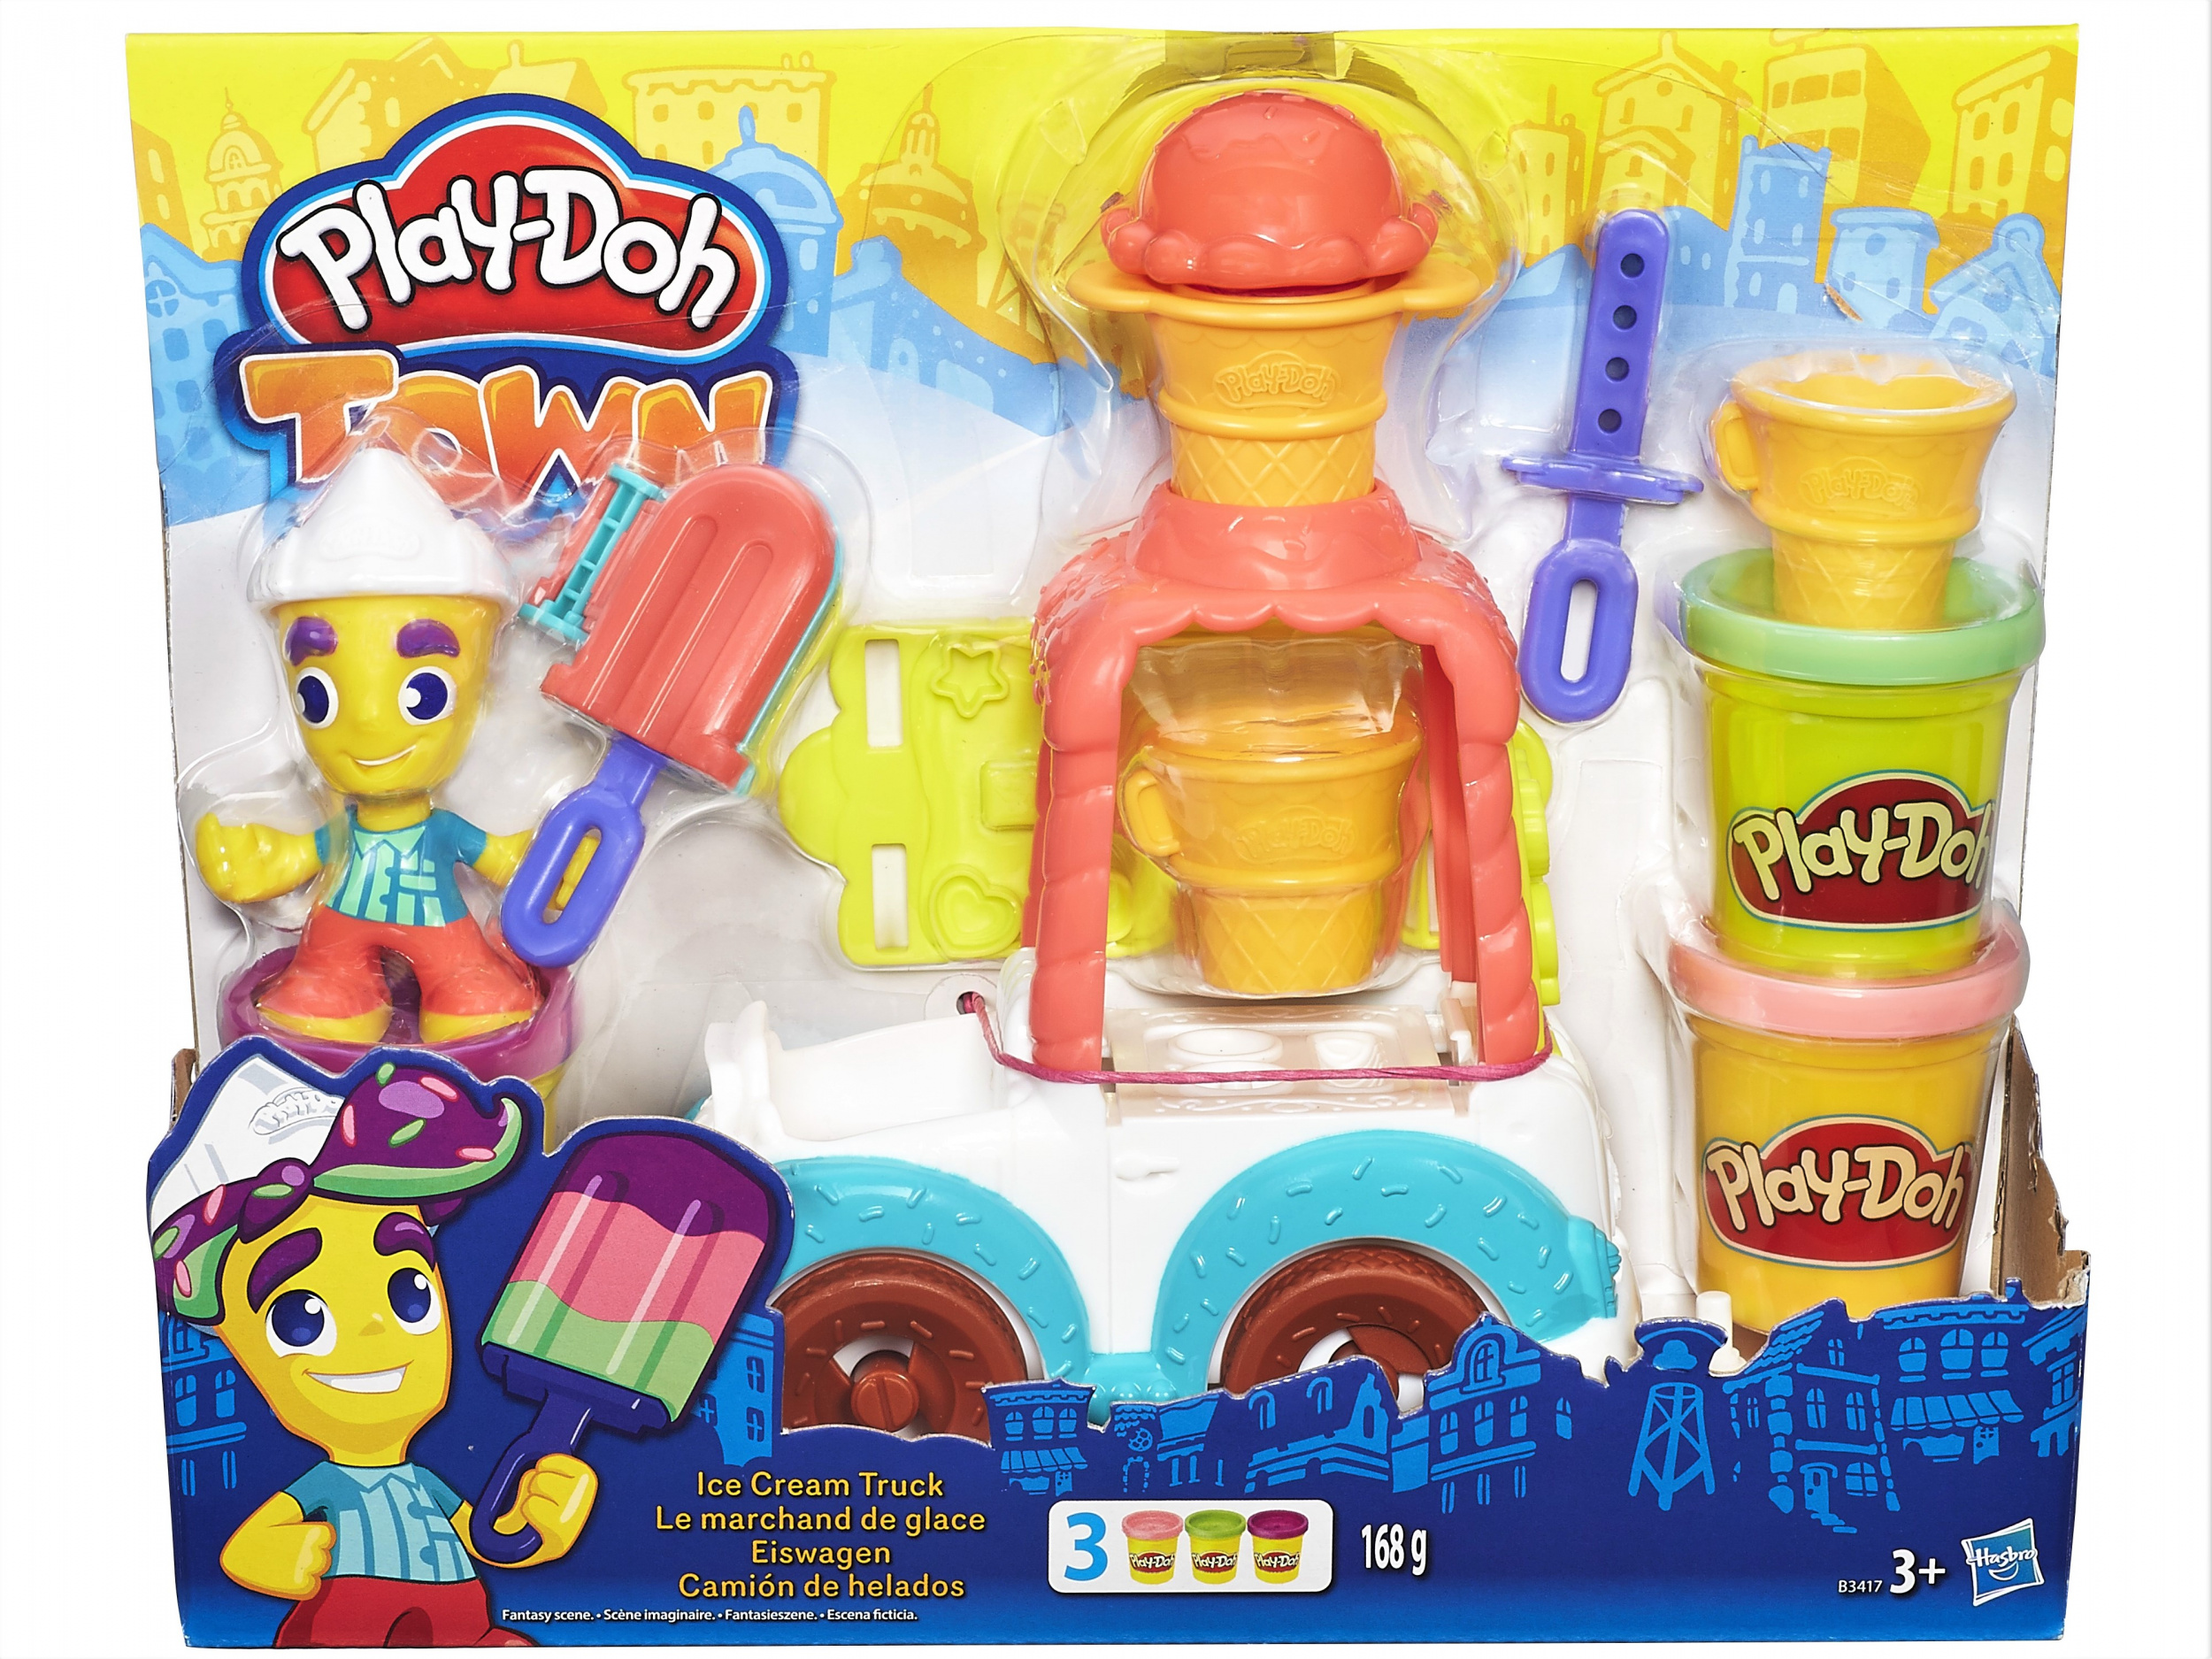 Play-Doh Town